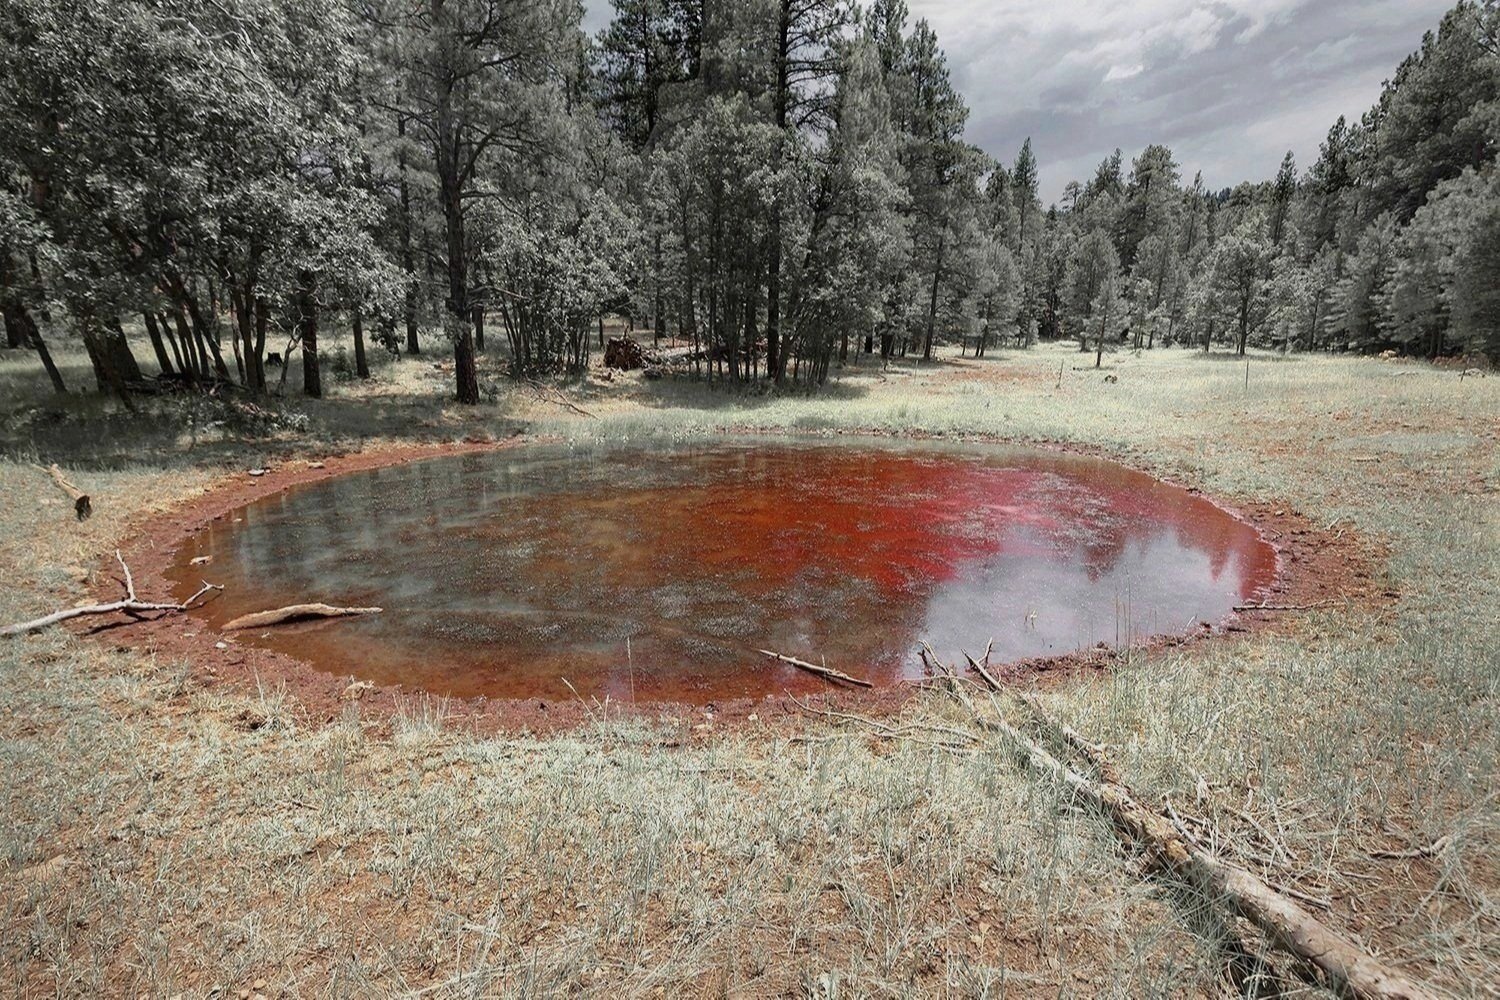 34.9736 N  -111.5288 W   Accidental Red Fire Retardant  Airdrop, Weimer Springs, Coconino Forest, AZ